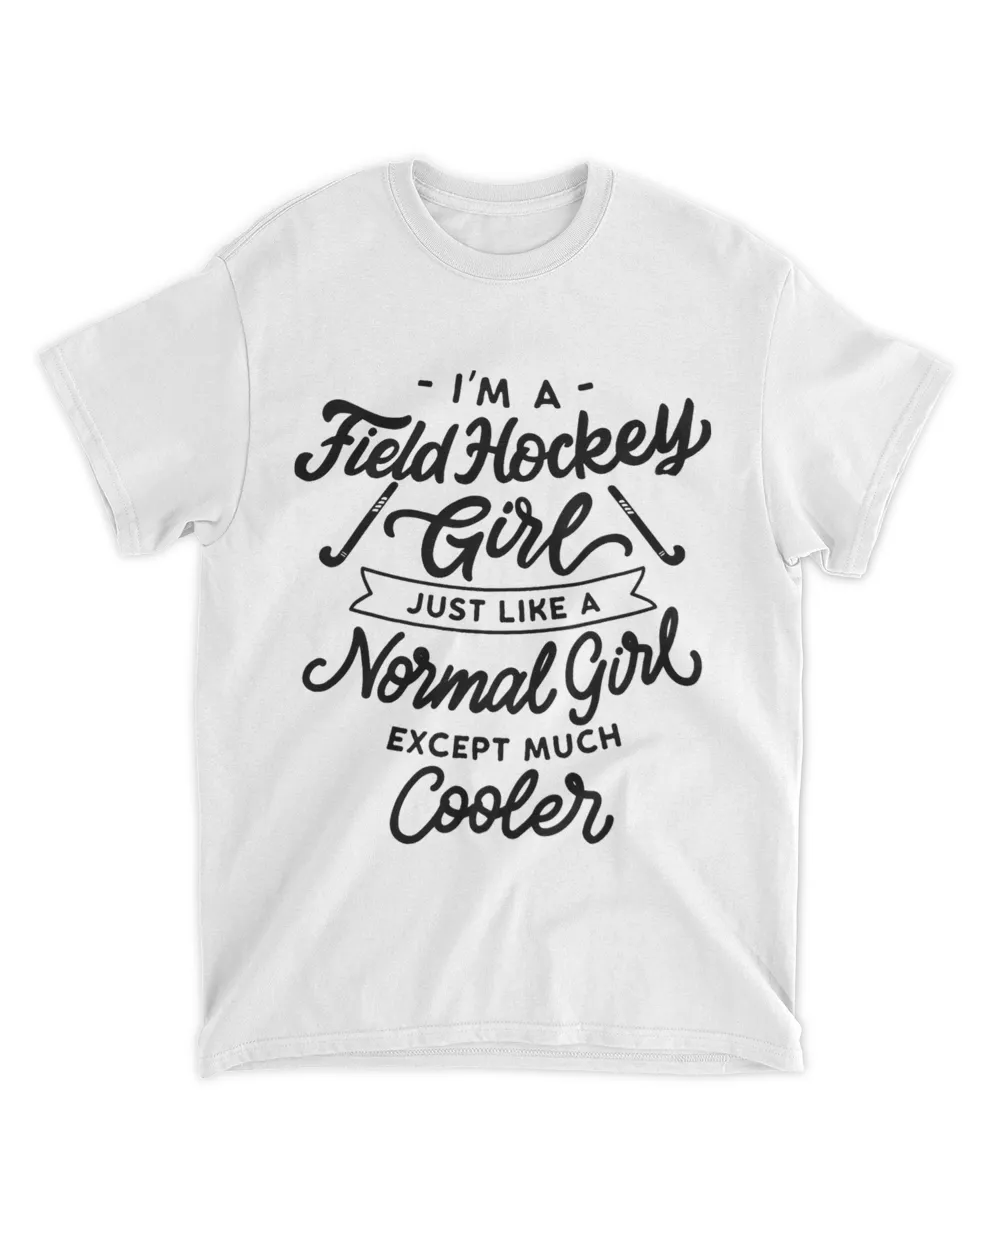 Field Hockey Girls Are Cooler 2Funny Sports Tee